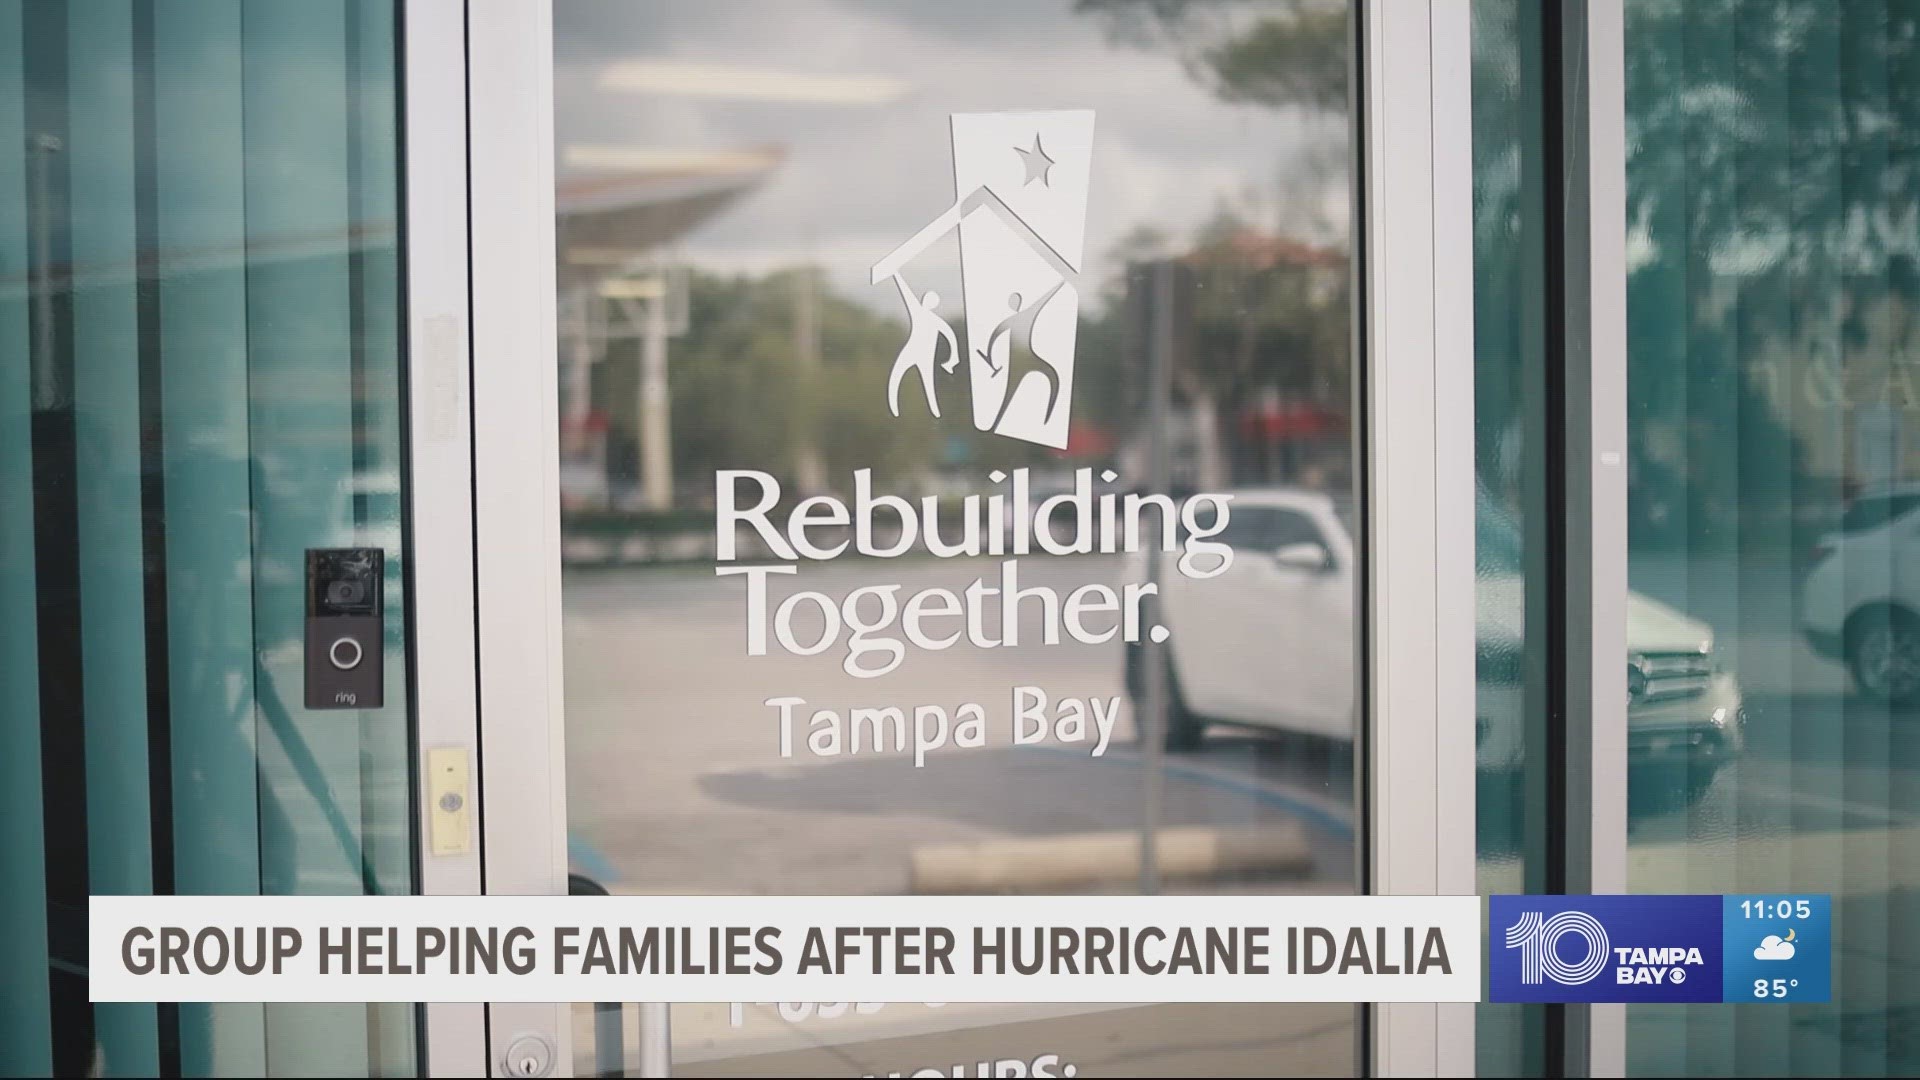 Rebuilding Together Tampa Bay is taking applications to help people impacted by the storm who may not have the means to fix their homes.